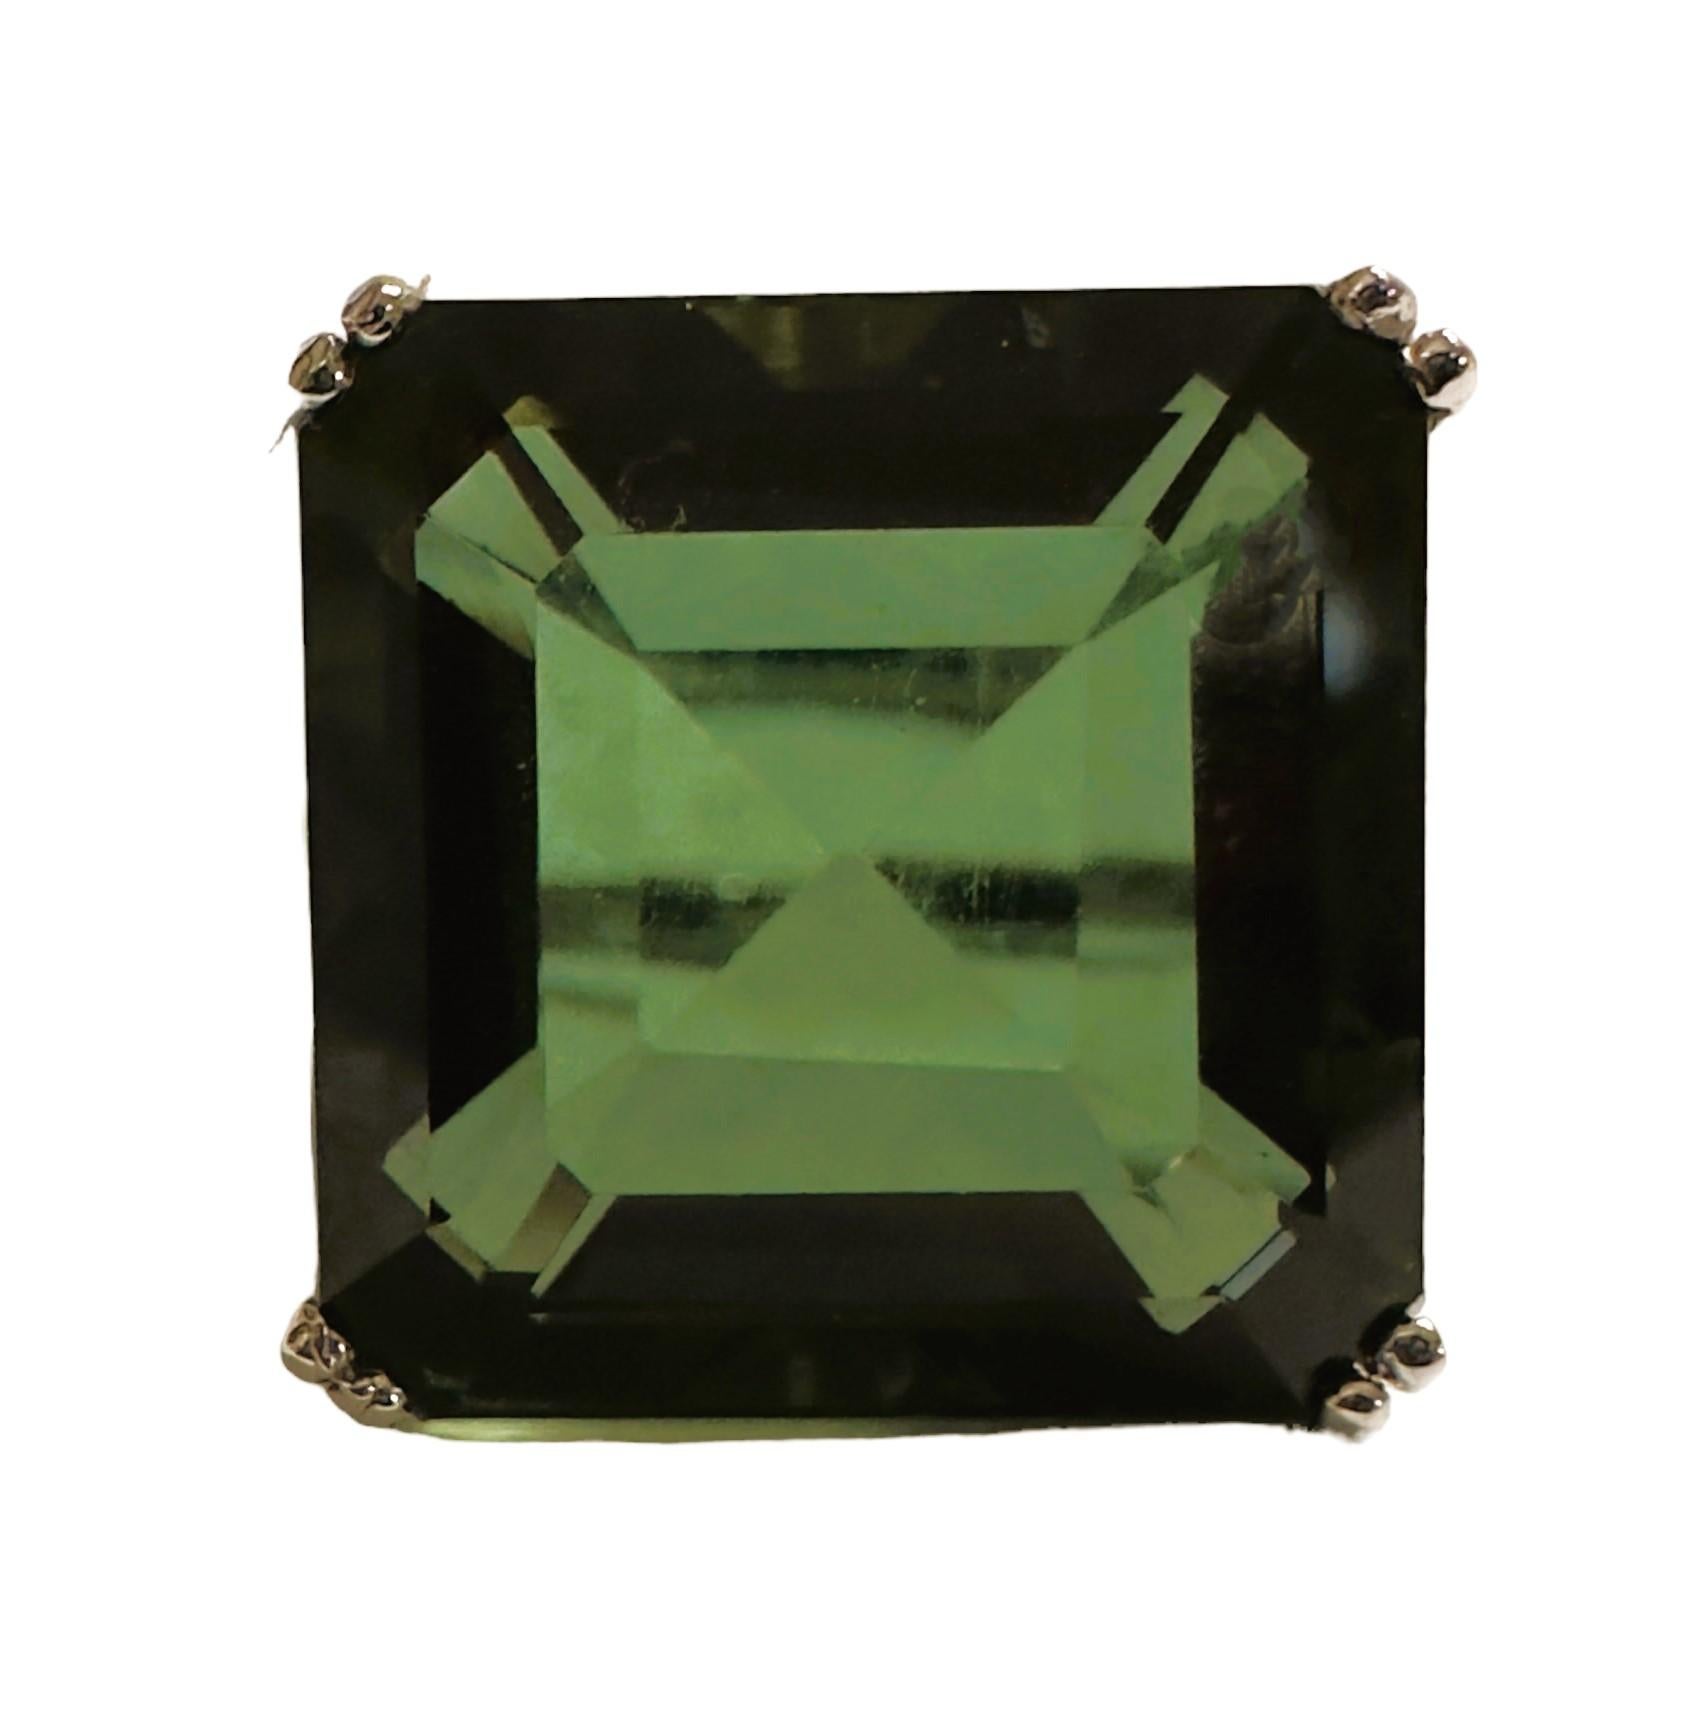 What a beautiful color this Stone is!  The ring is a size 6.75.  This stone is from Africa. It is a beautiful princess cut stone and is 14.80 cts.  It's a very high quality stone.  The 